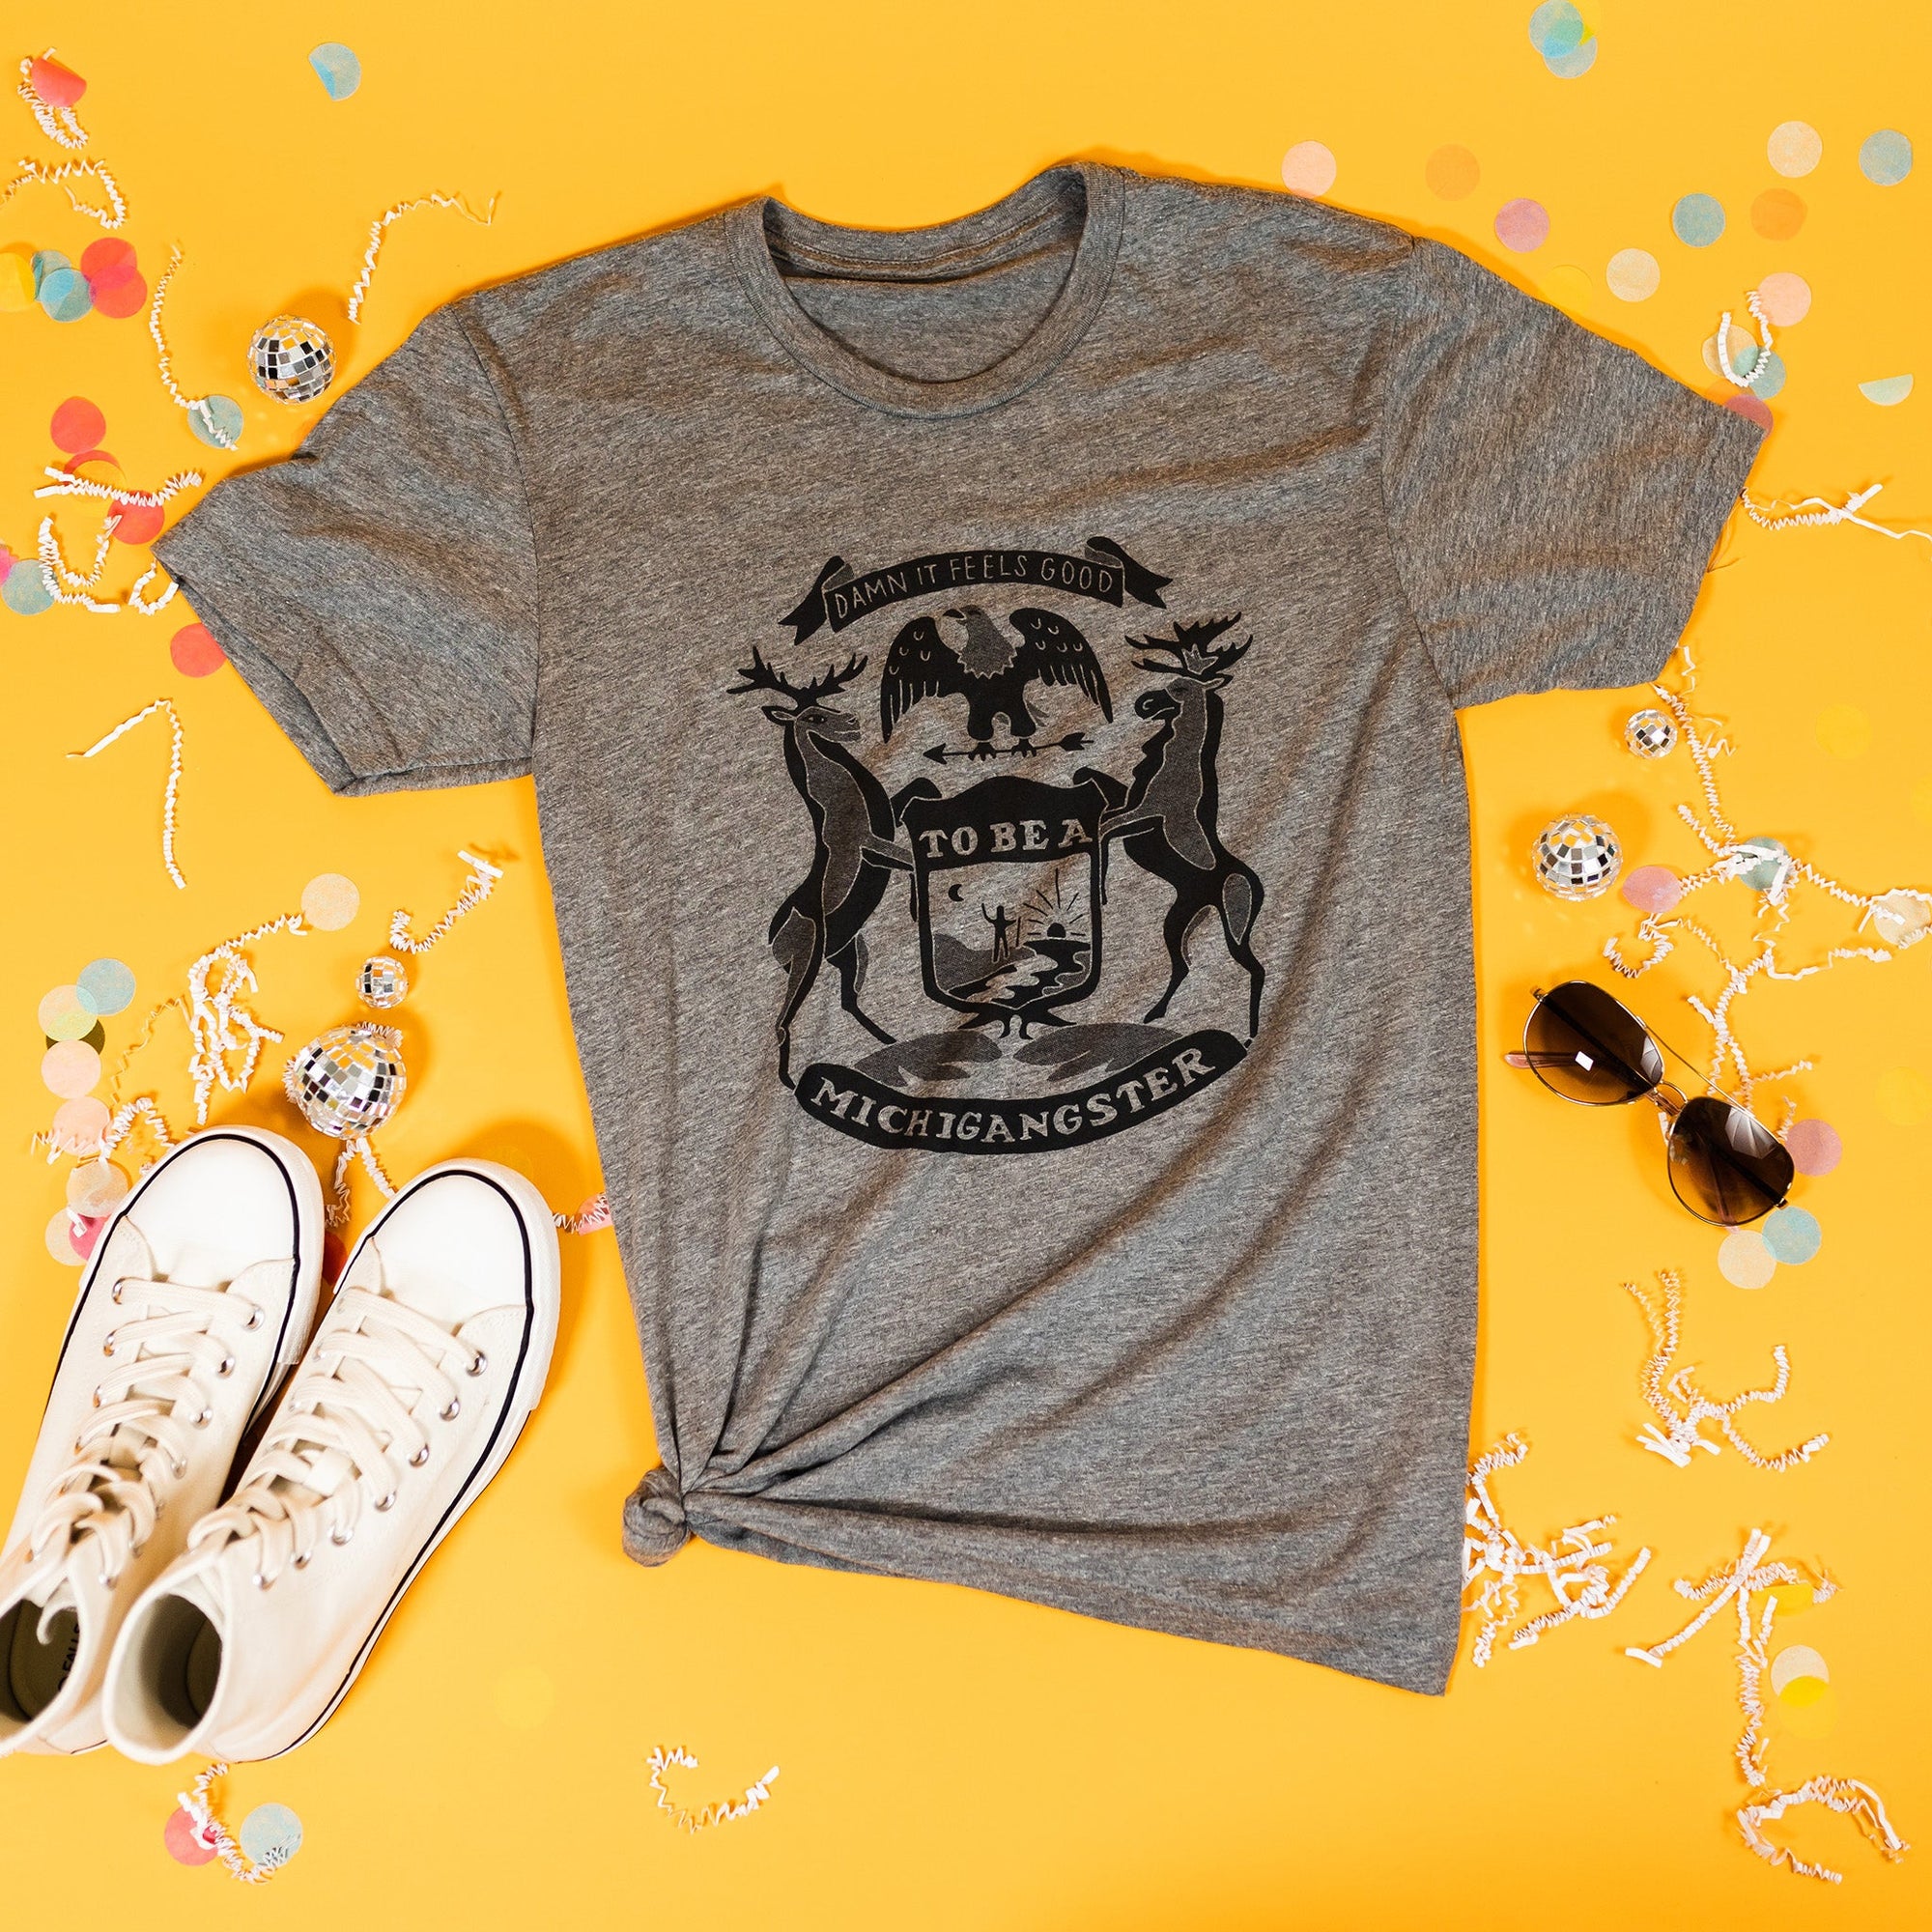 On a sunny mustard background sits a t-shirt with white crinkle and big, colorful confetti scattered around. There are mini disco balls, sunglasses, and a pair of white sneakers. This heather grey tee features hand lettering and custom illustrations of a modern, lighthearted take on the flag of Michigan. It is in black ink.